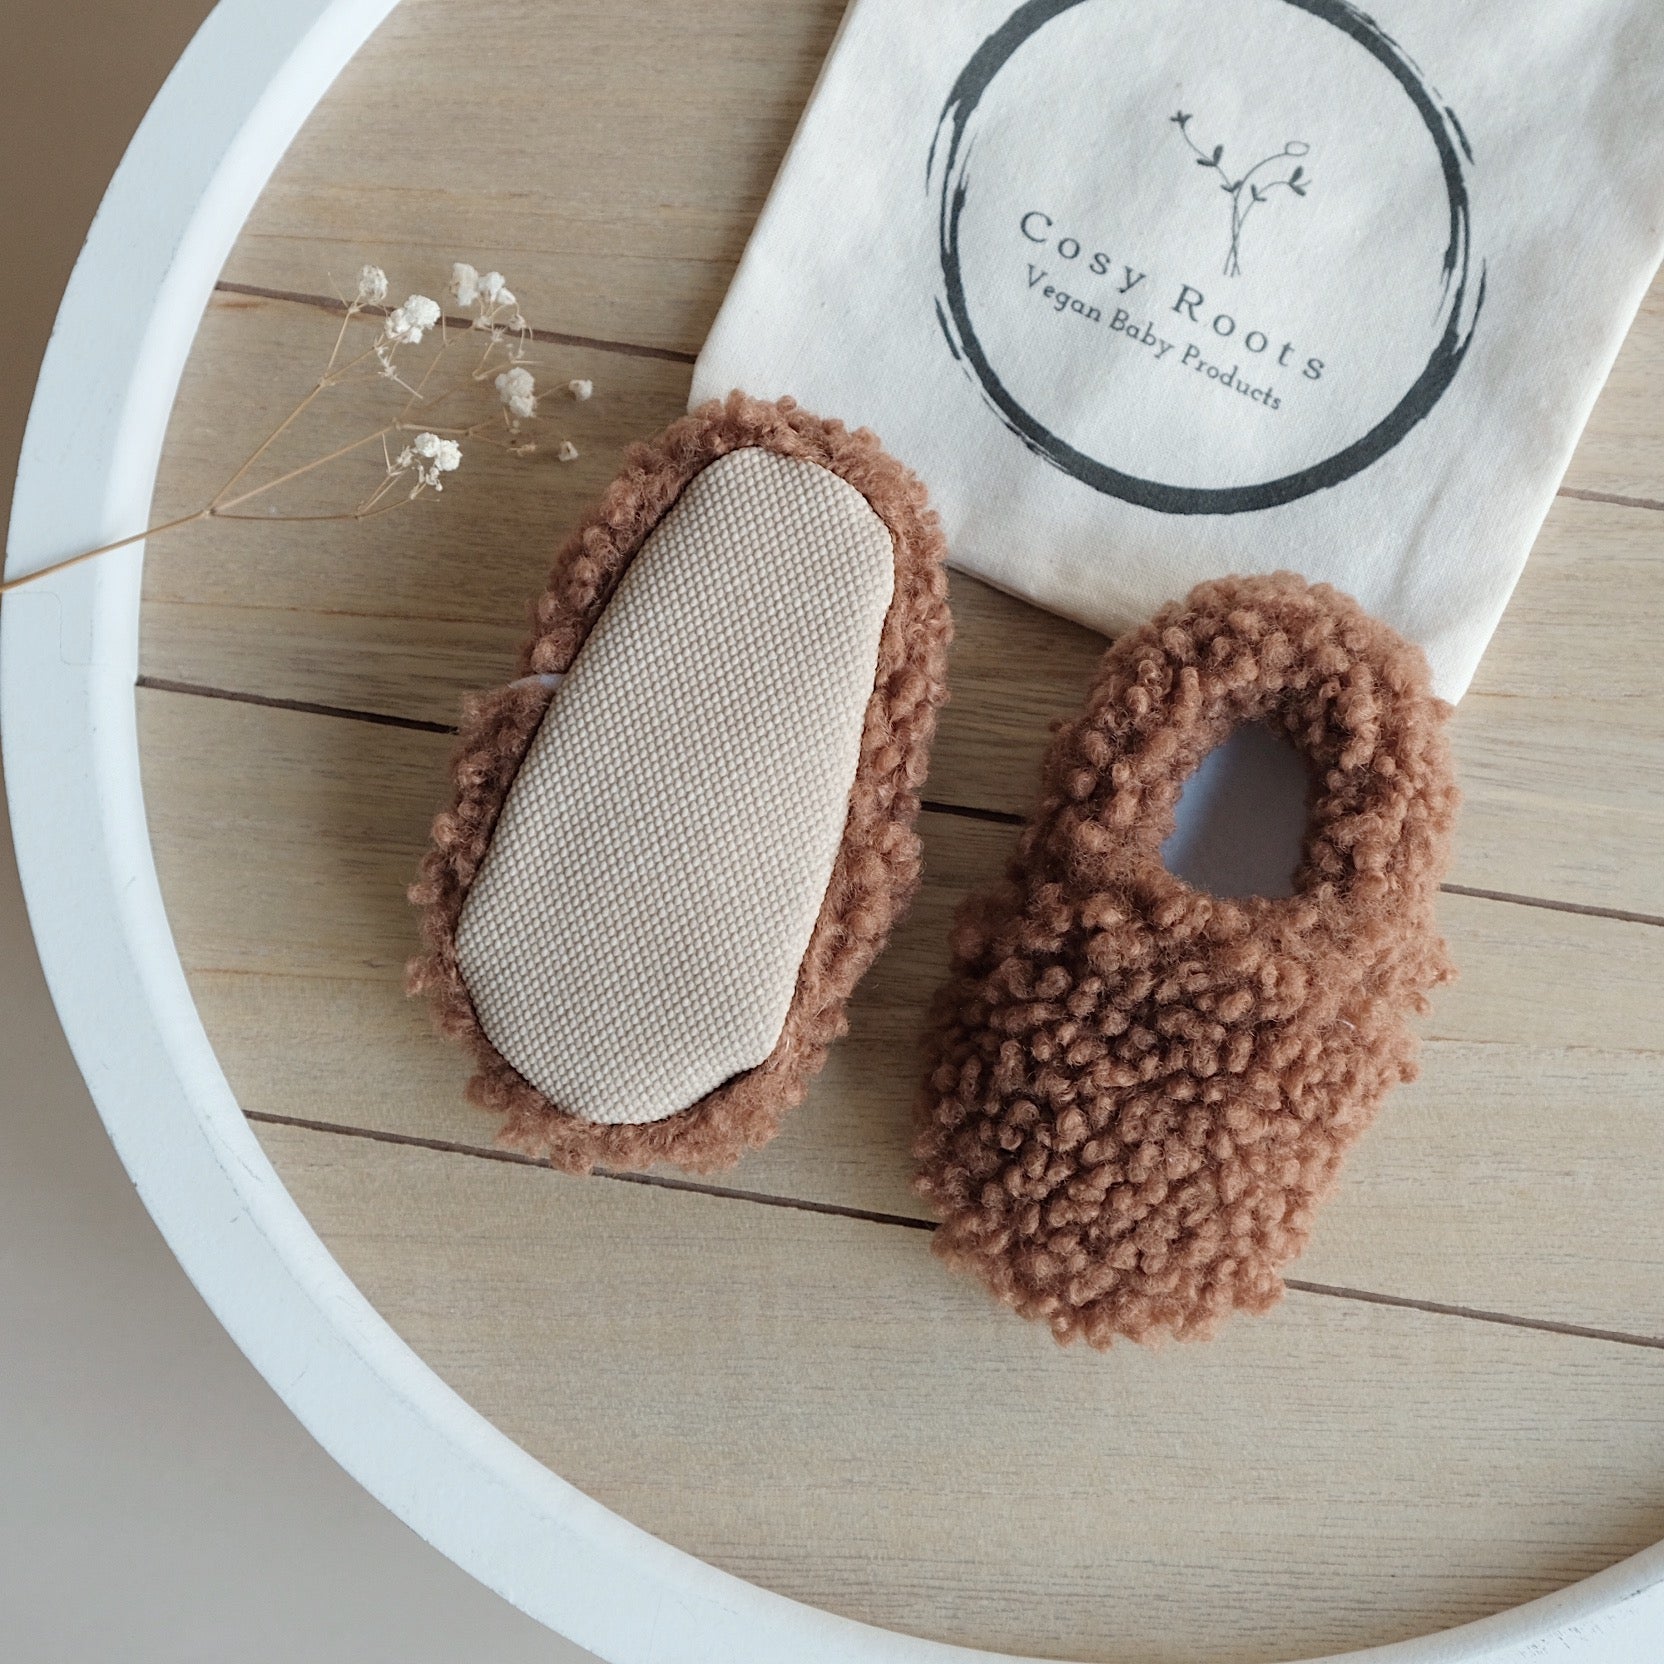 Vegan Shoes - Isii_bla X Cosy Roots - Teddy Shoes - Chocolate